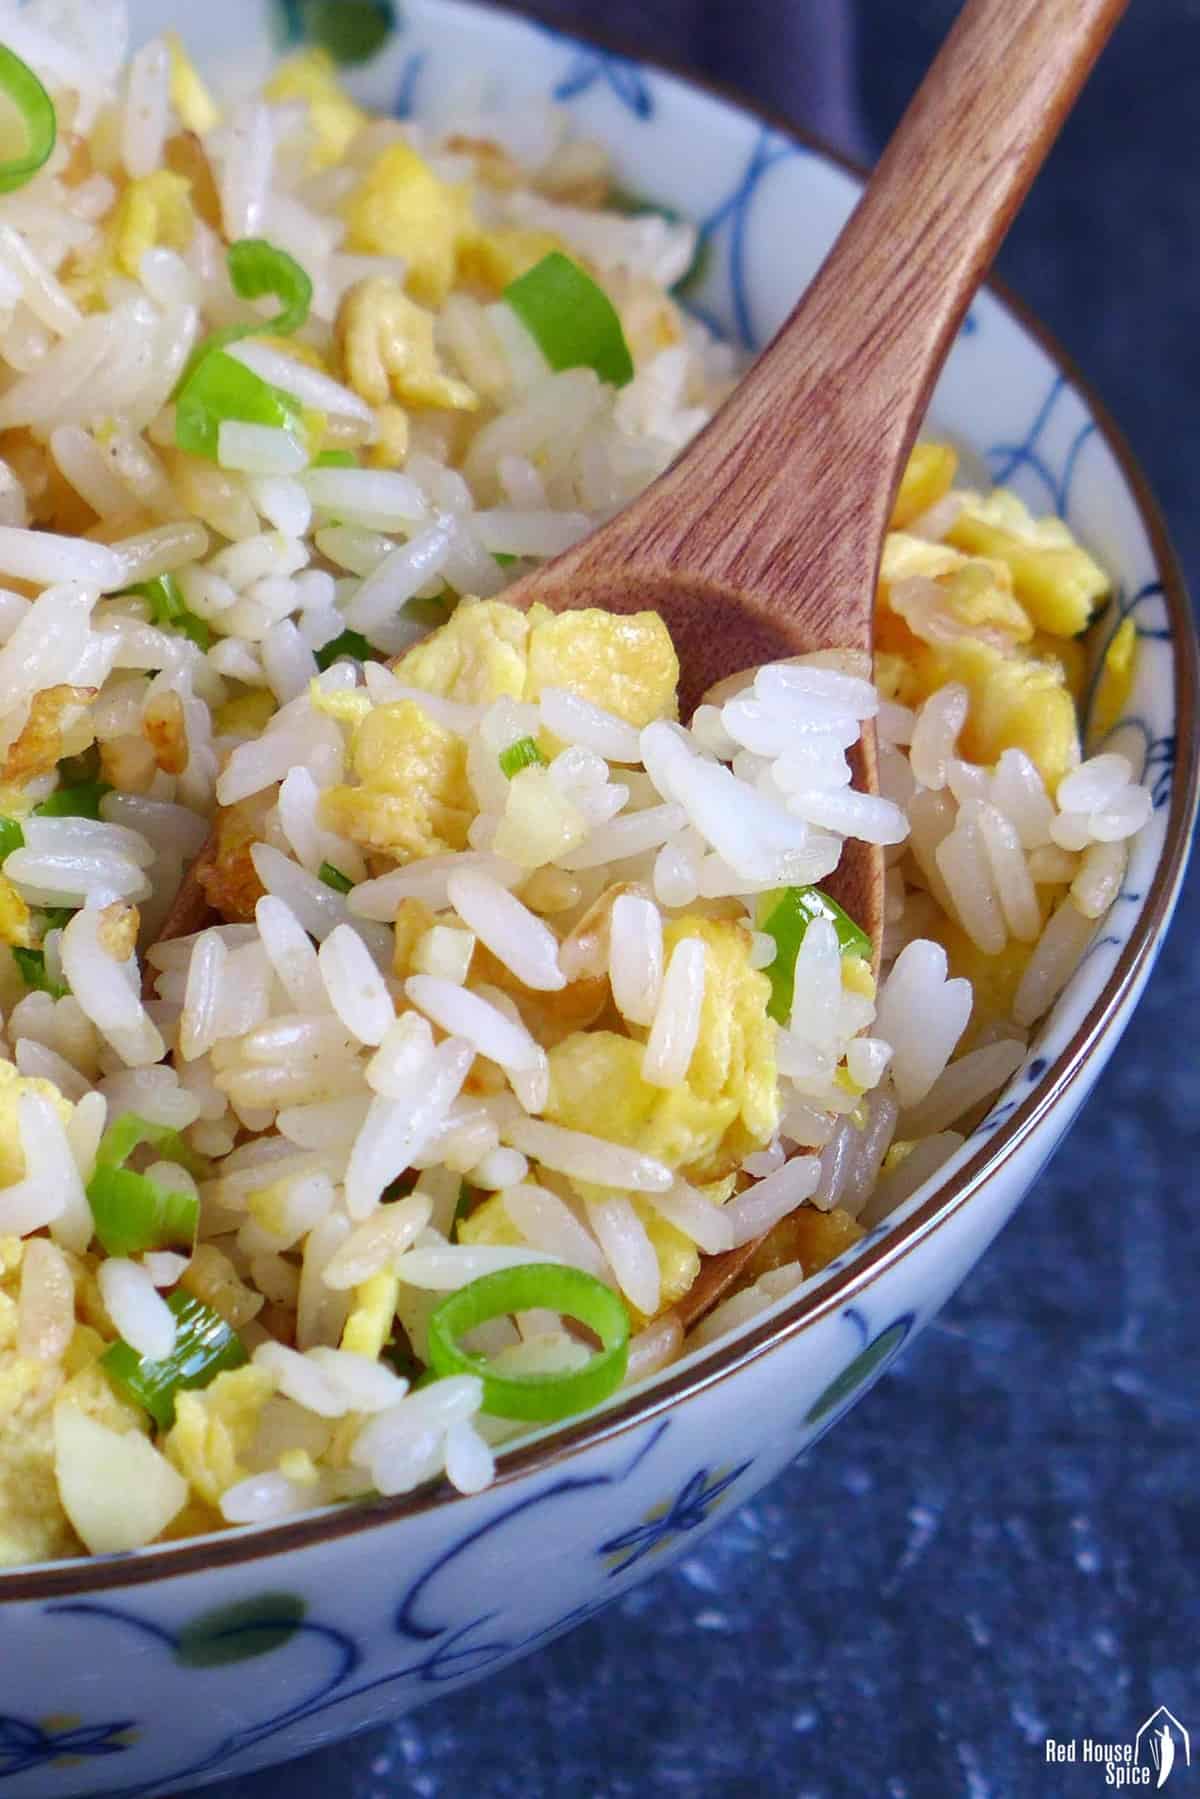 Scooping out egg fried rice with a spoon.